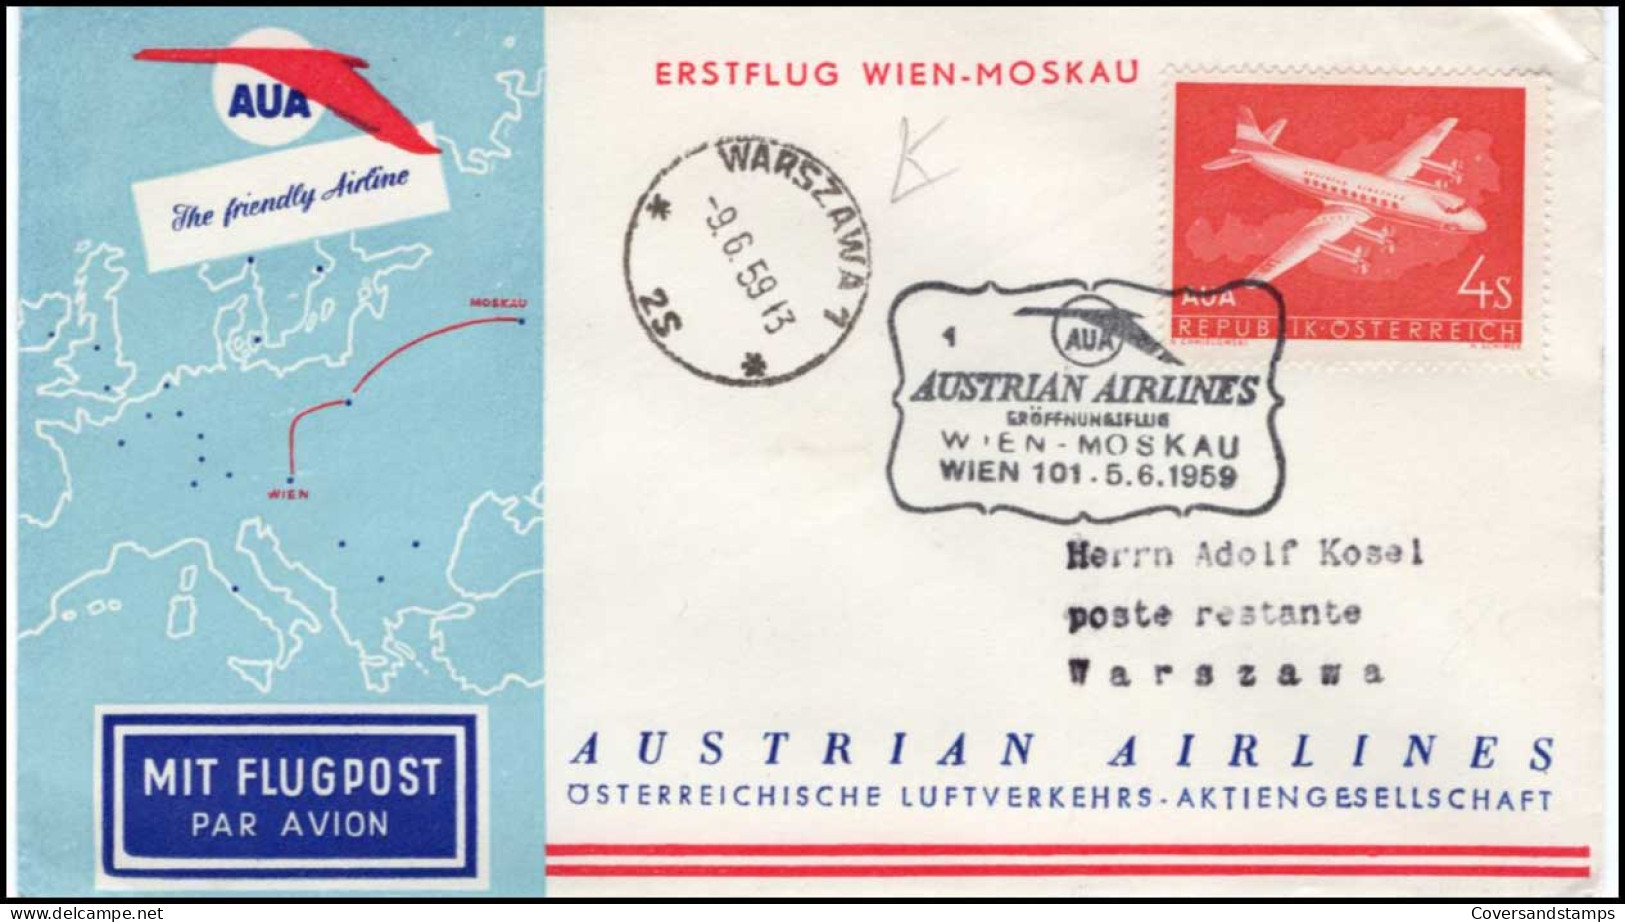 First Flight Vienna-Moscow, 1959 - First Flight Covers